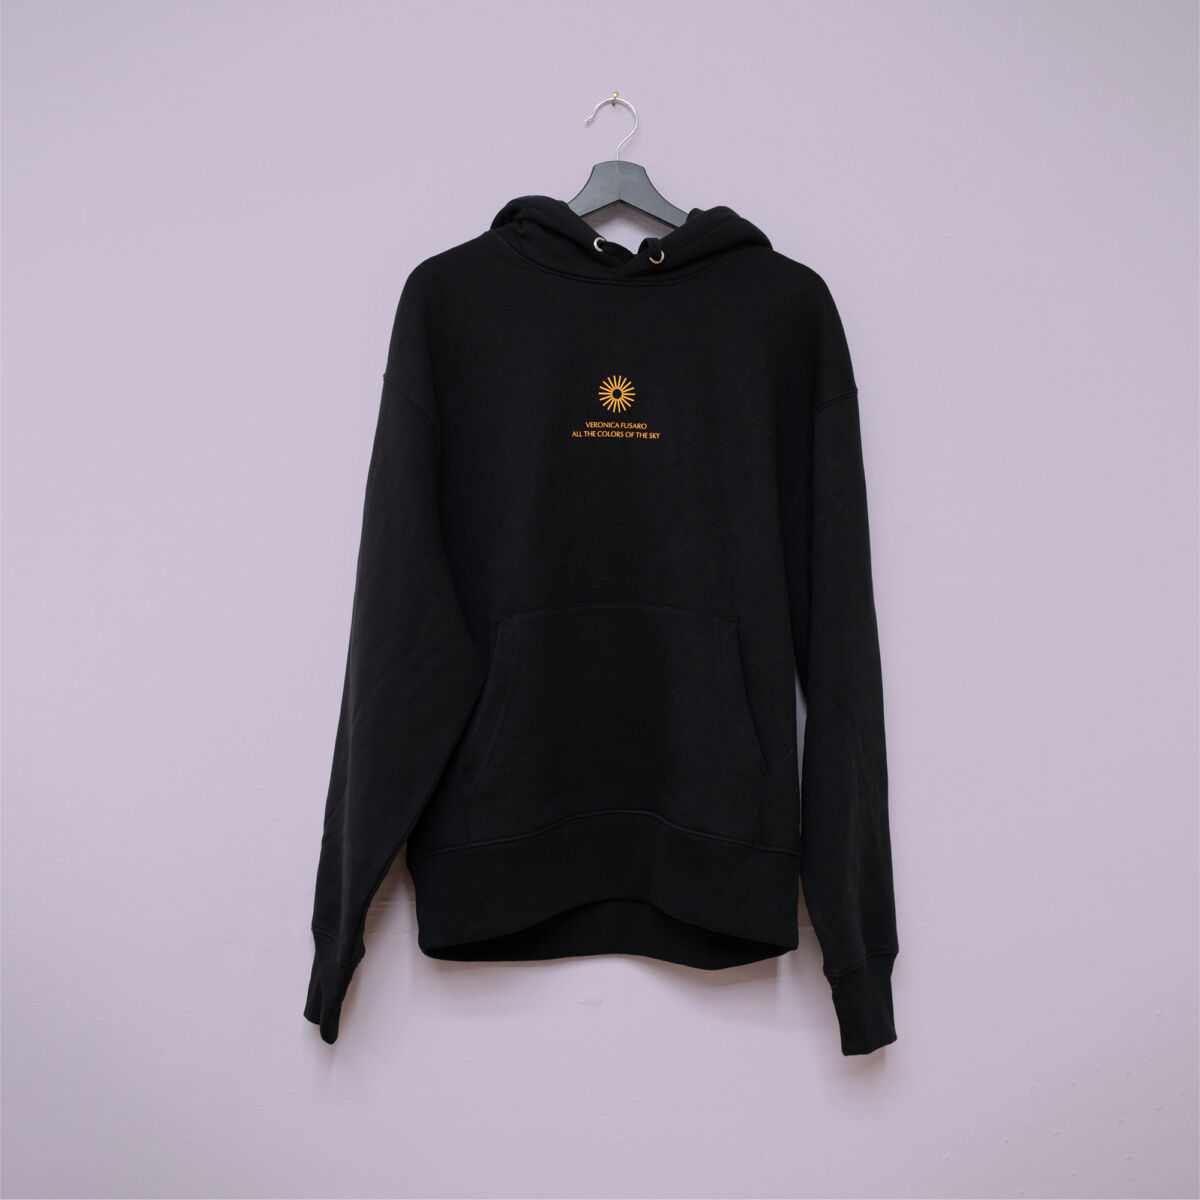 Hoodie ATCOTS - Black - Front